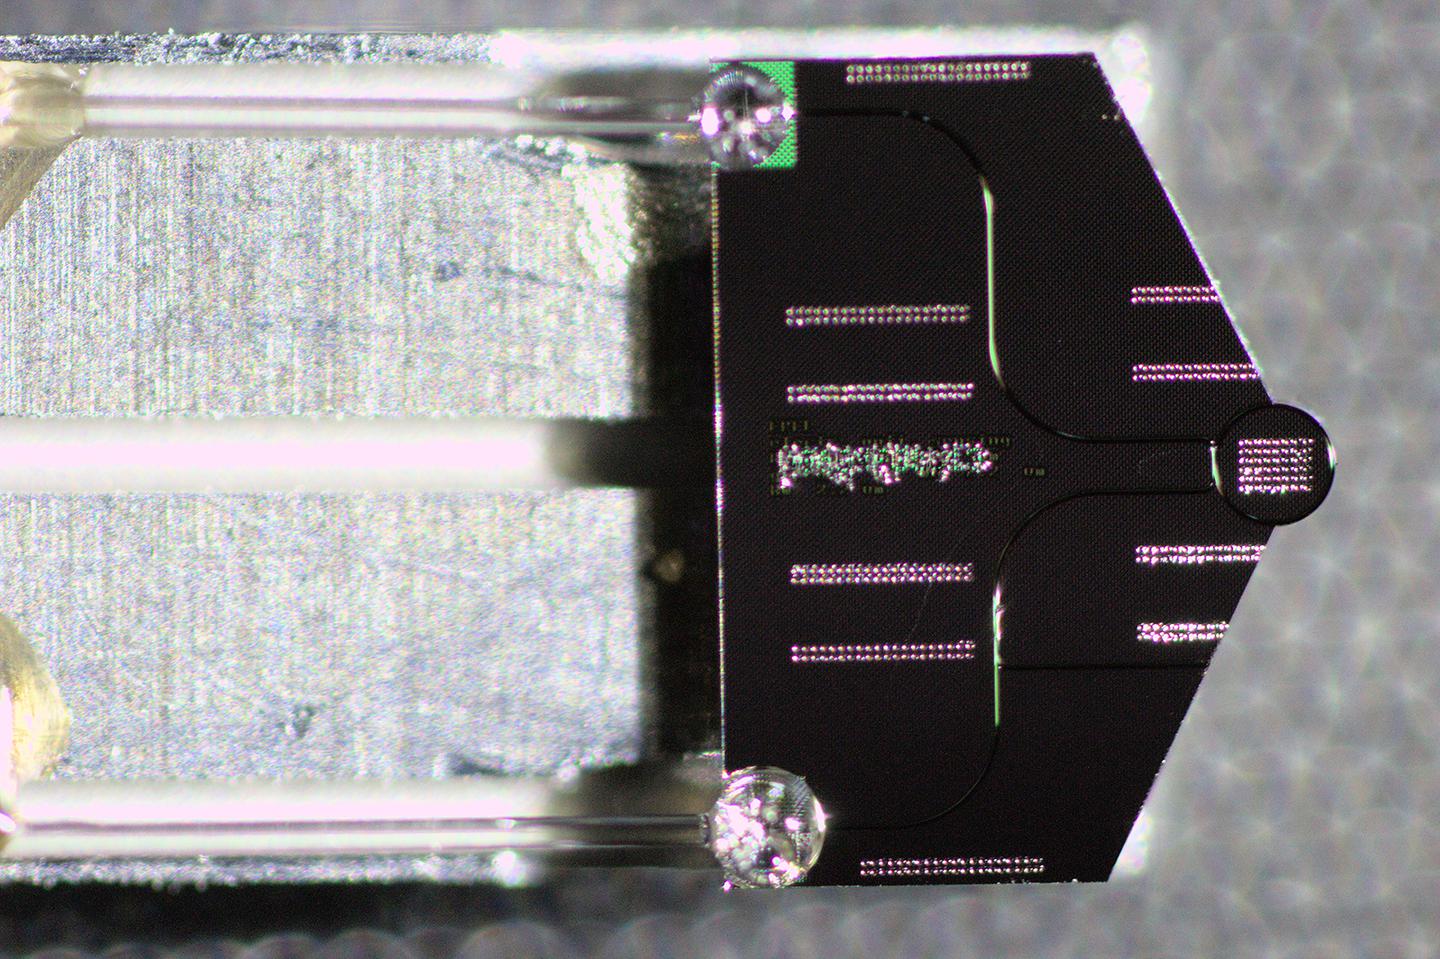 Photonic chip used in this study, mounted on a transmission electron microscope sample holder and packaged with optical fibers. Credit: Yang et al. DOI: 10.1126/science.adk2489